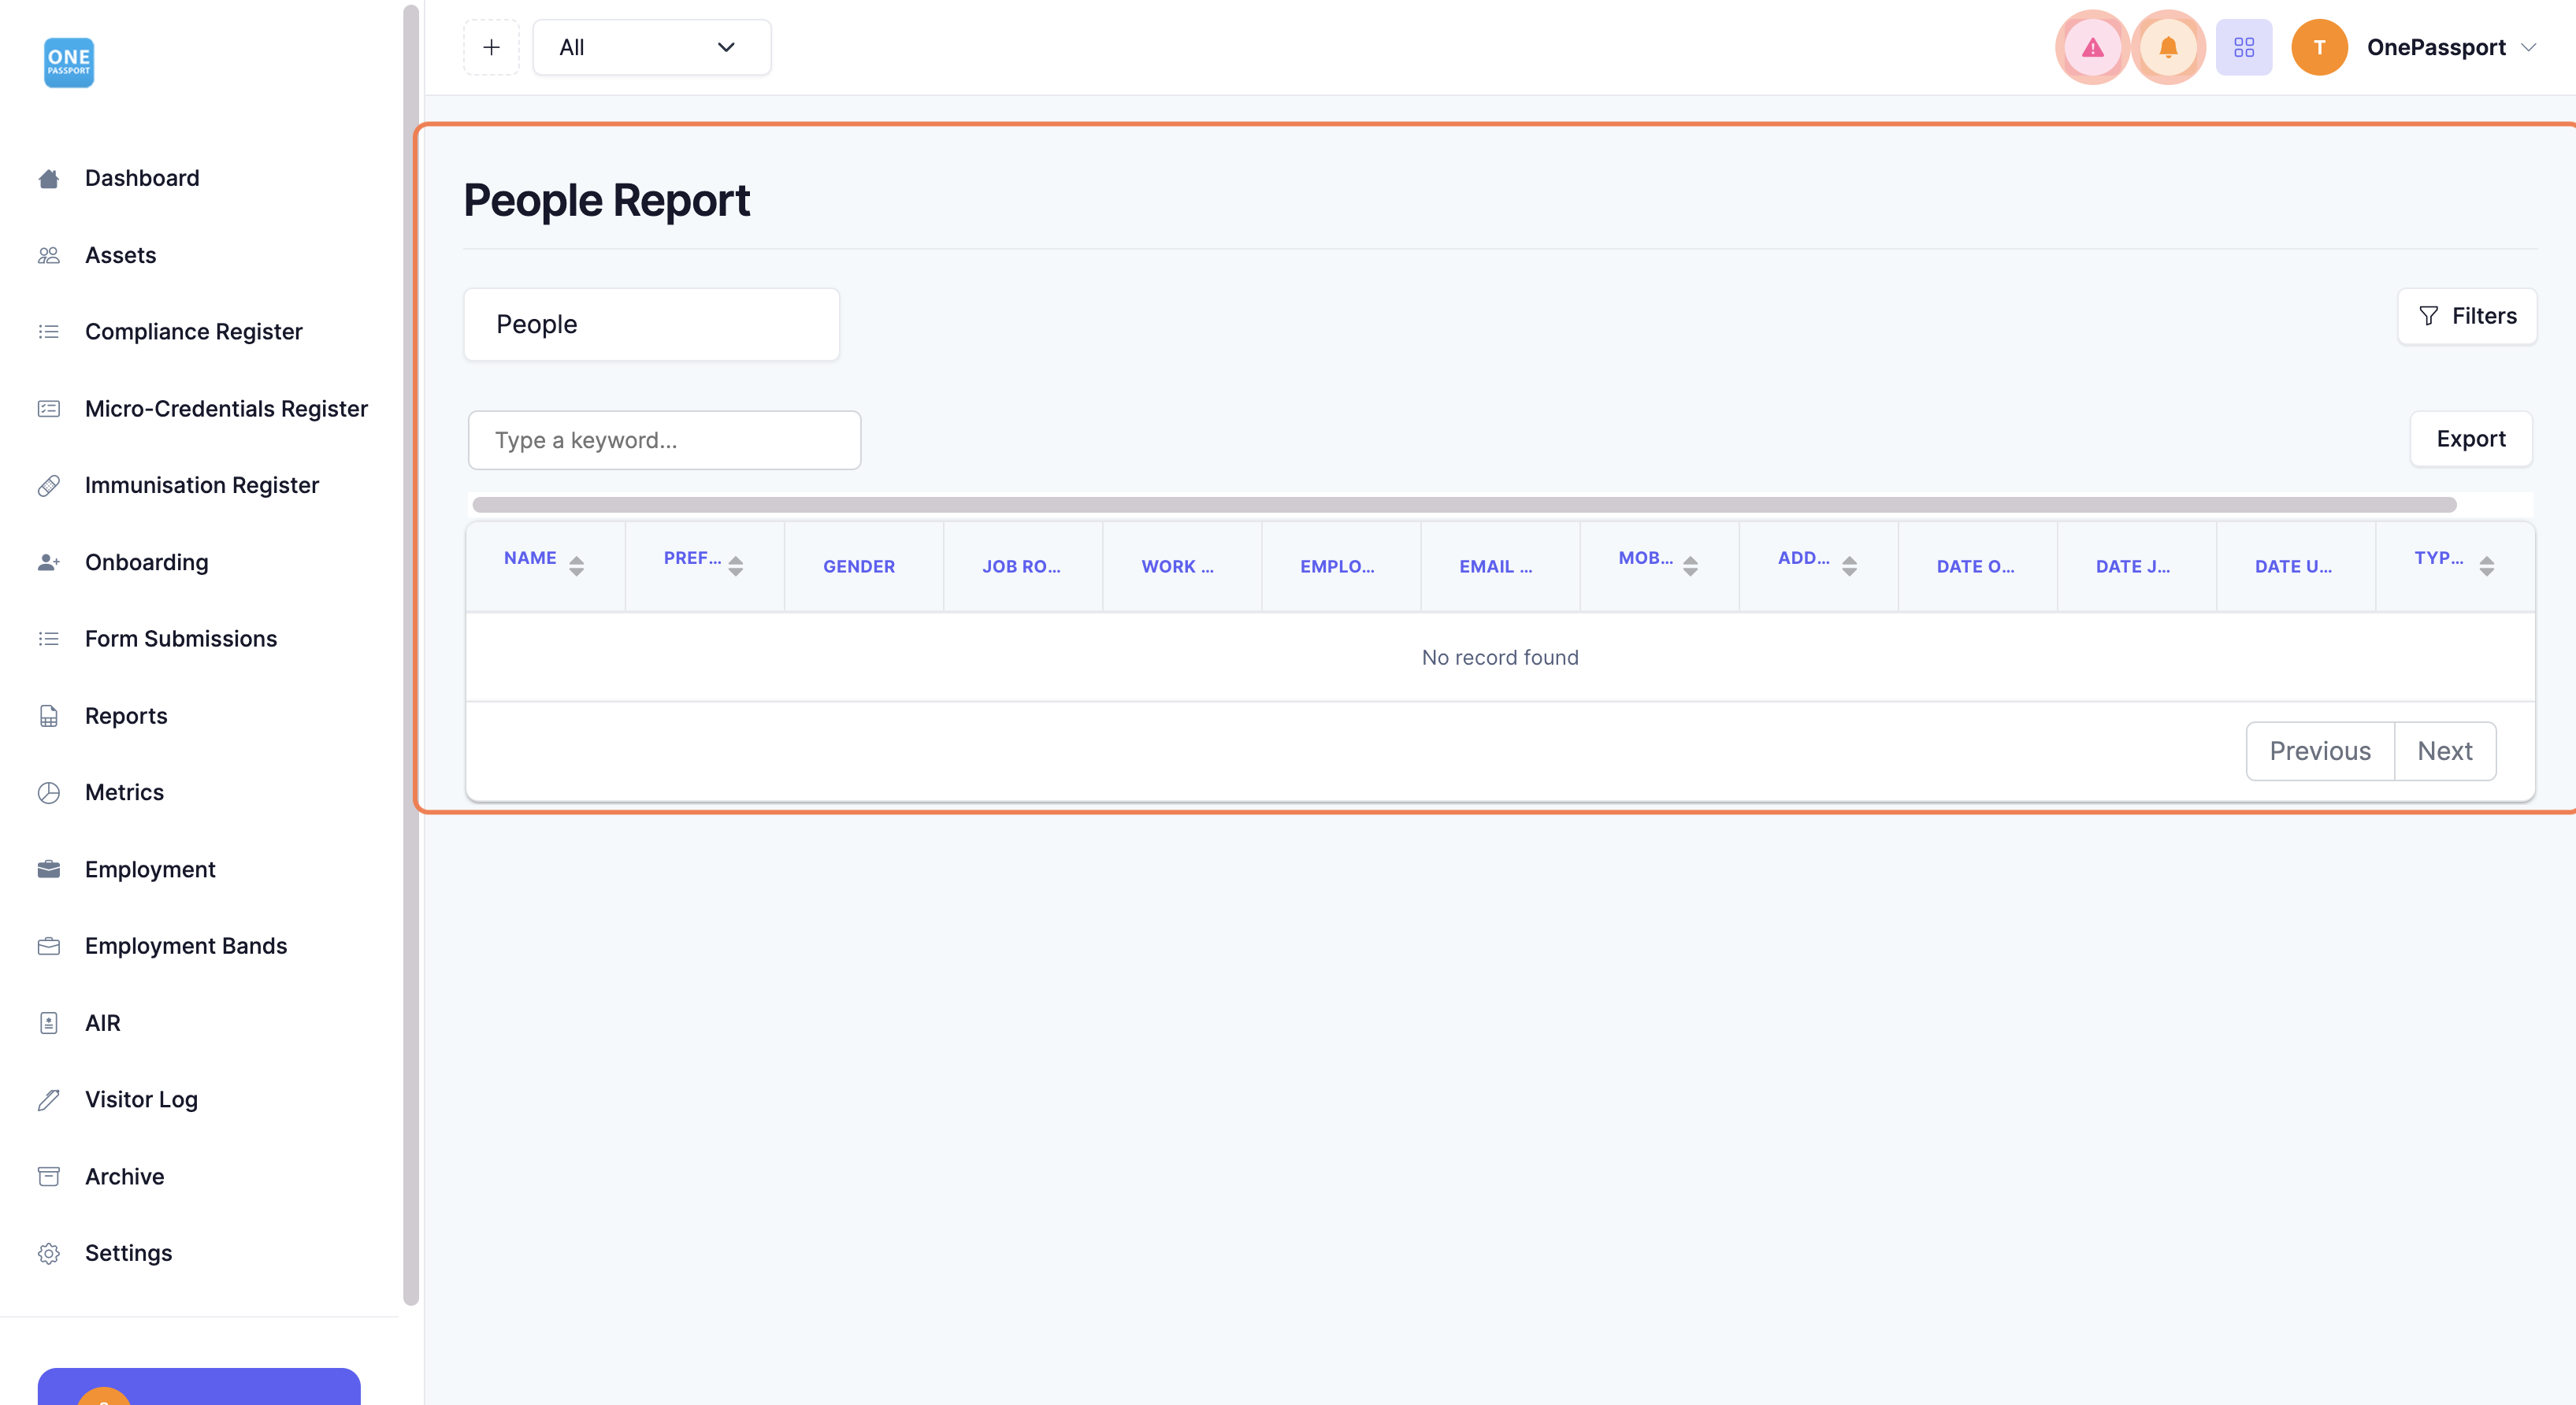 By default, the drop-down will show the People Report. Simply click the Filters button at this stage.